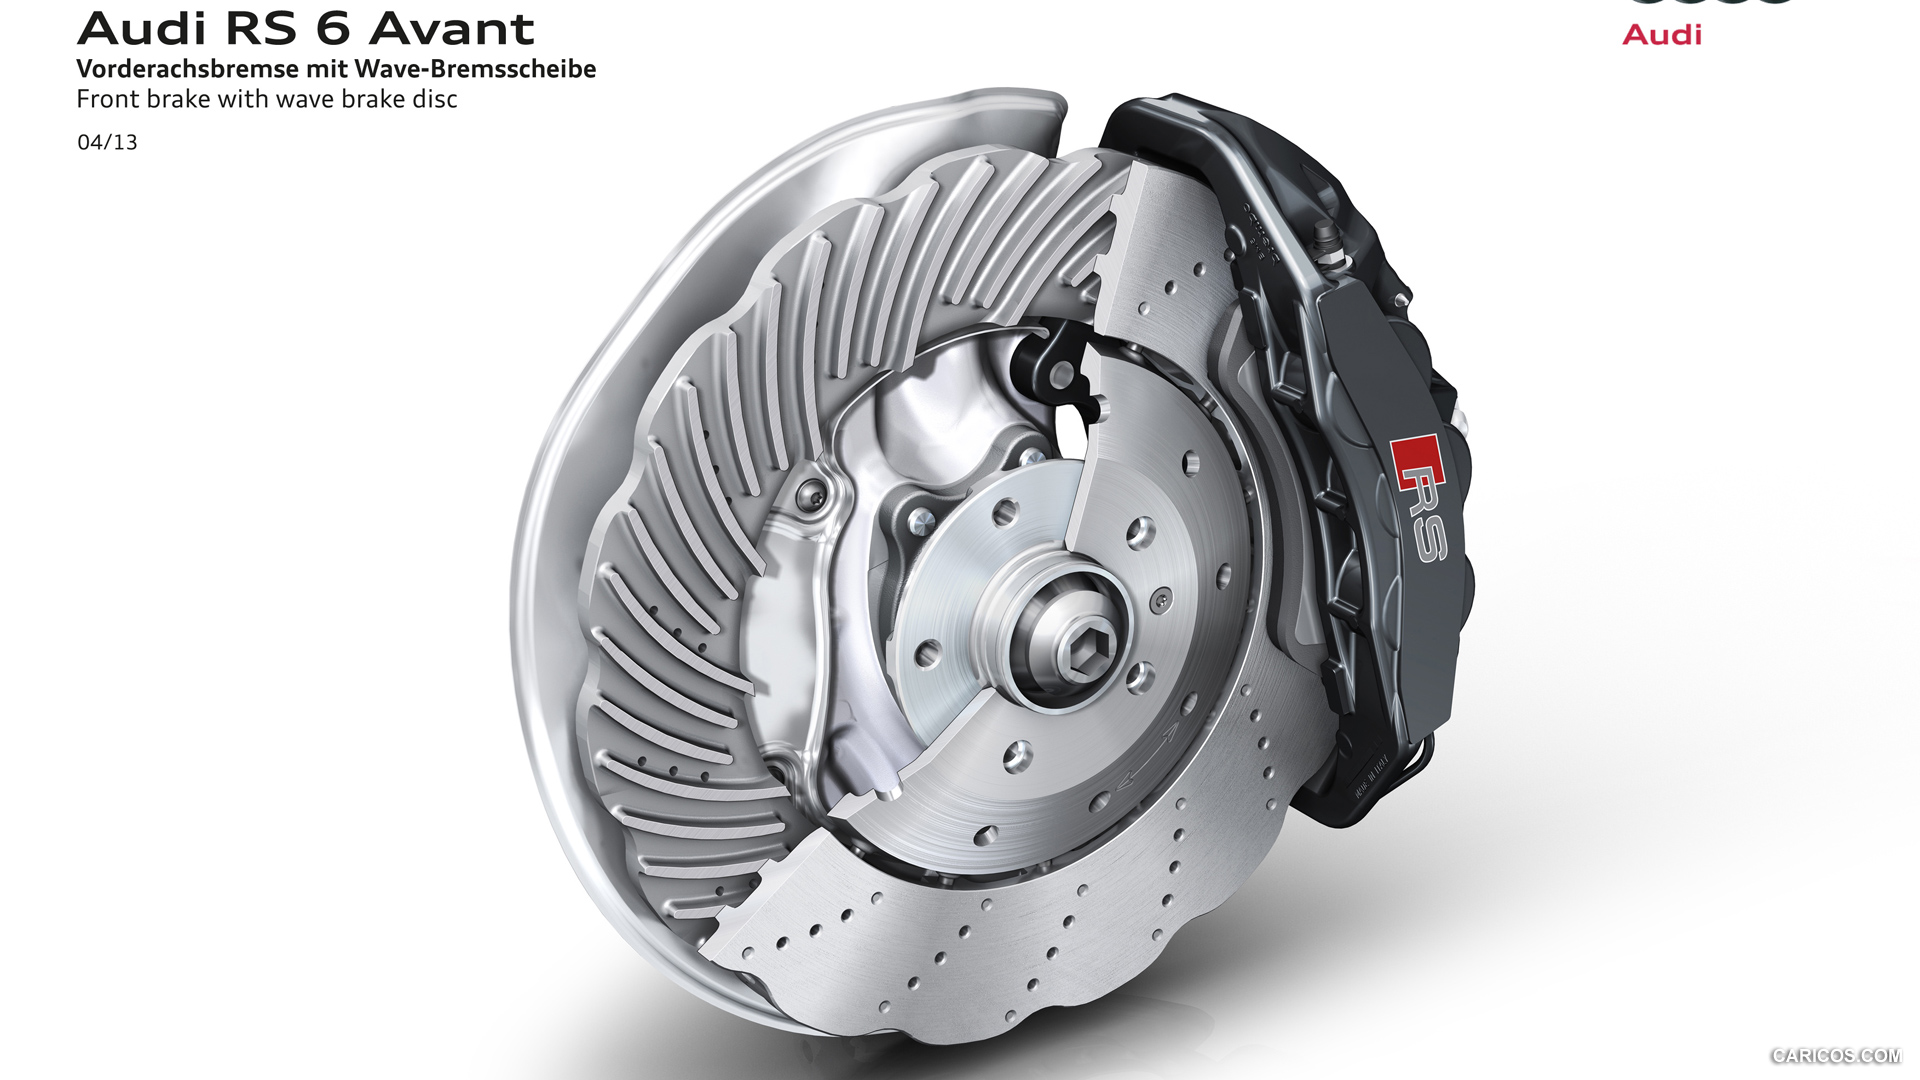 Audi Rs6 Avant Front Brake With Wave Disc HD